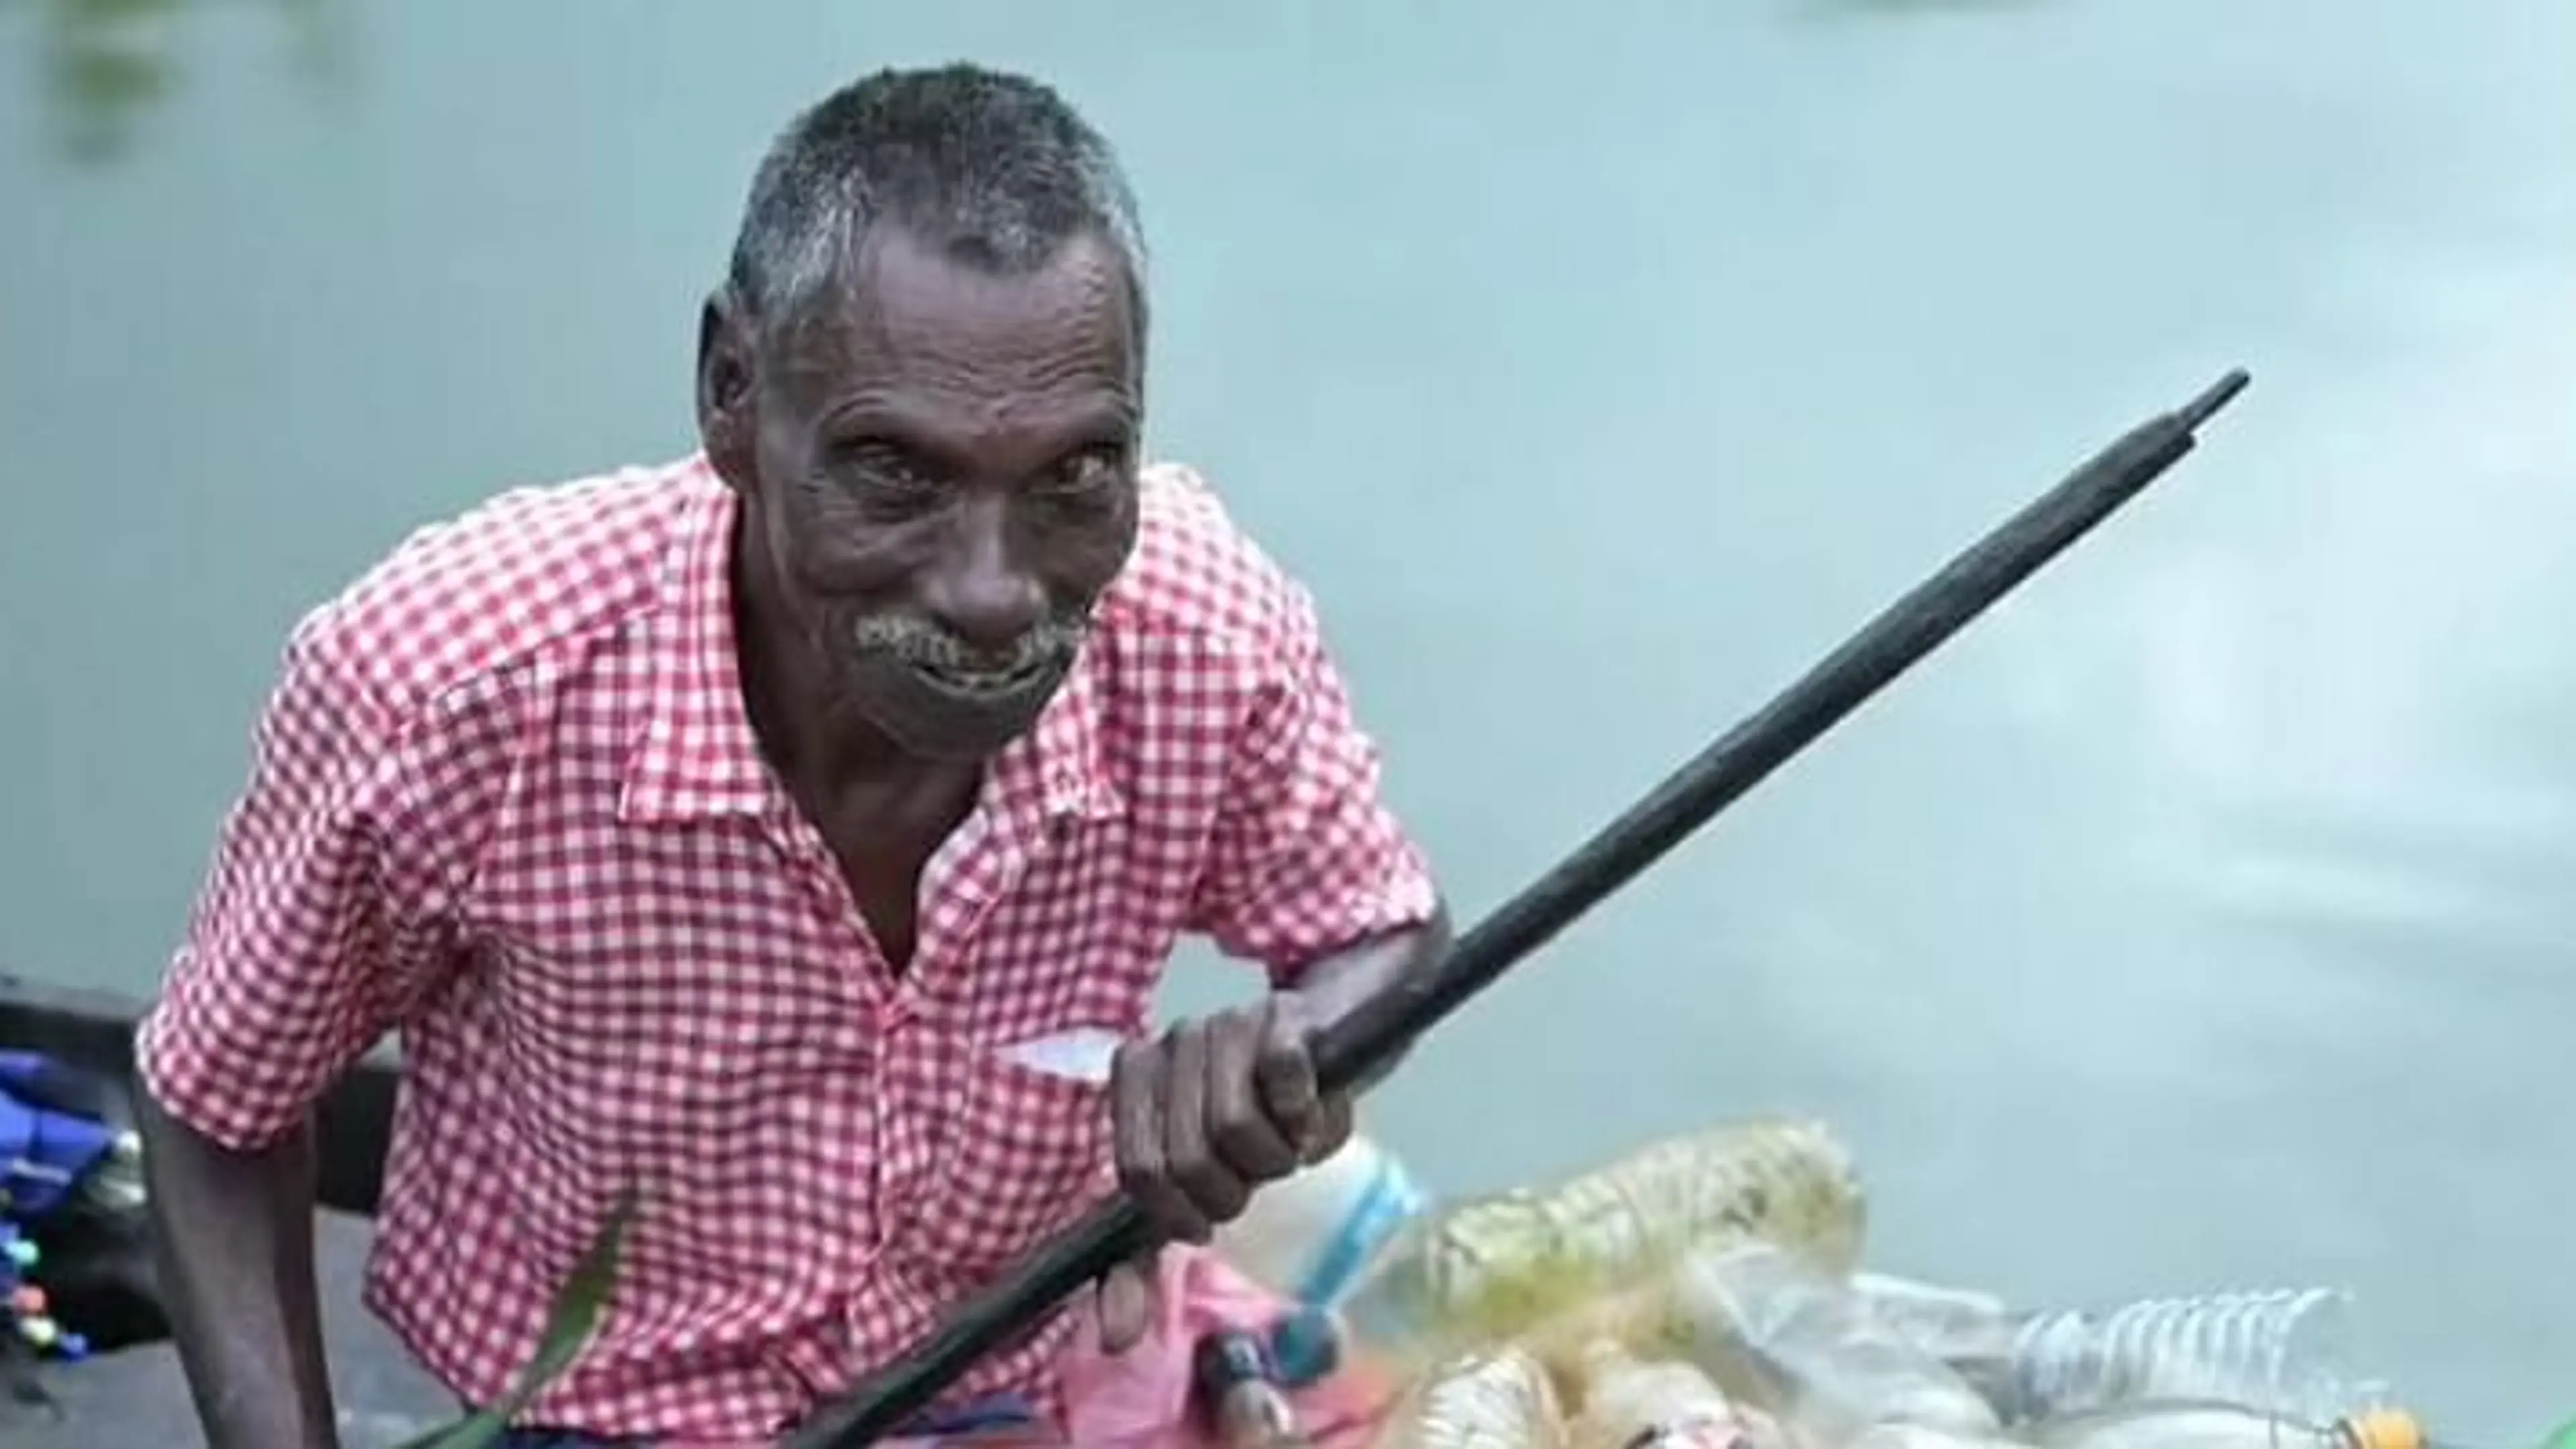 Meet the 69-year-old paralysed man who cleans Vembanad Lake every single day